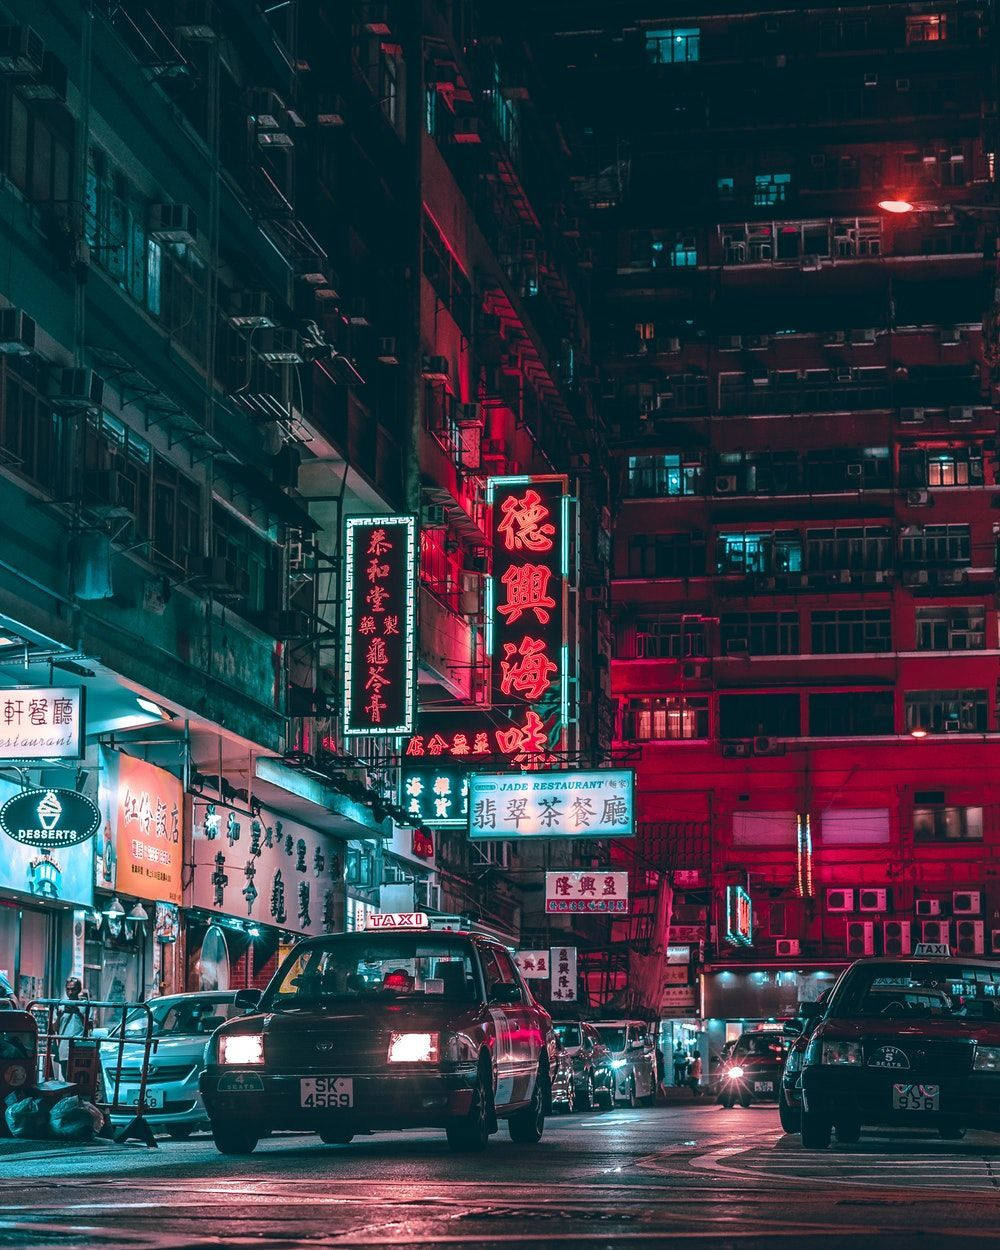 "The beauty of nighttime in the city" Wallpaper